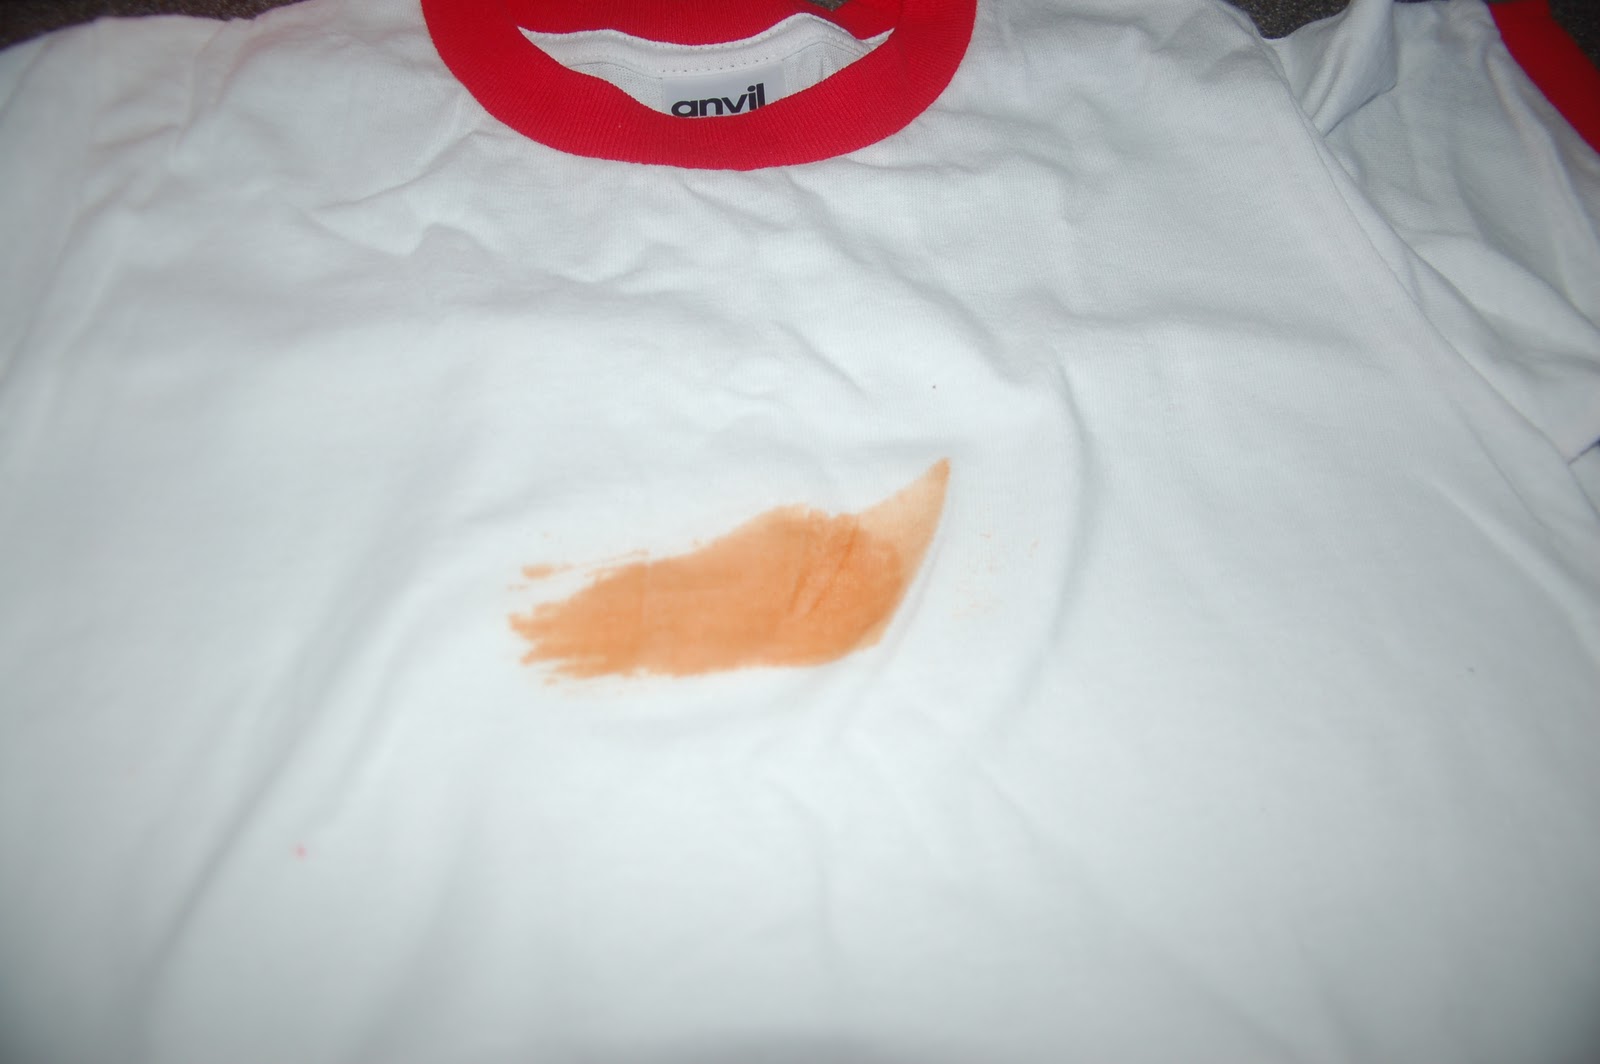 Wisk Laundry Detergent Experiment 2 Ketchup